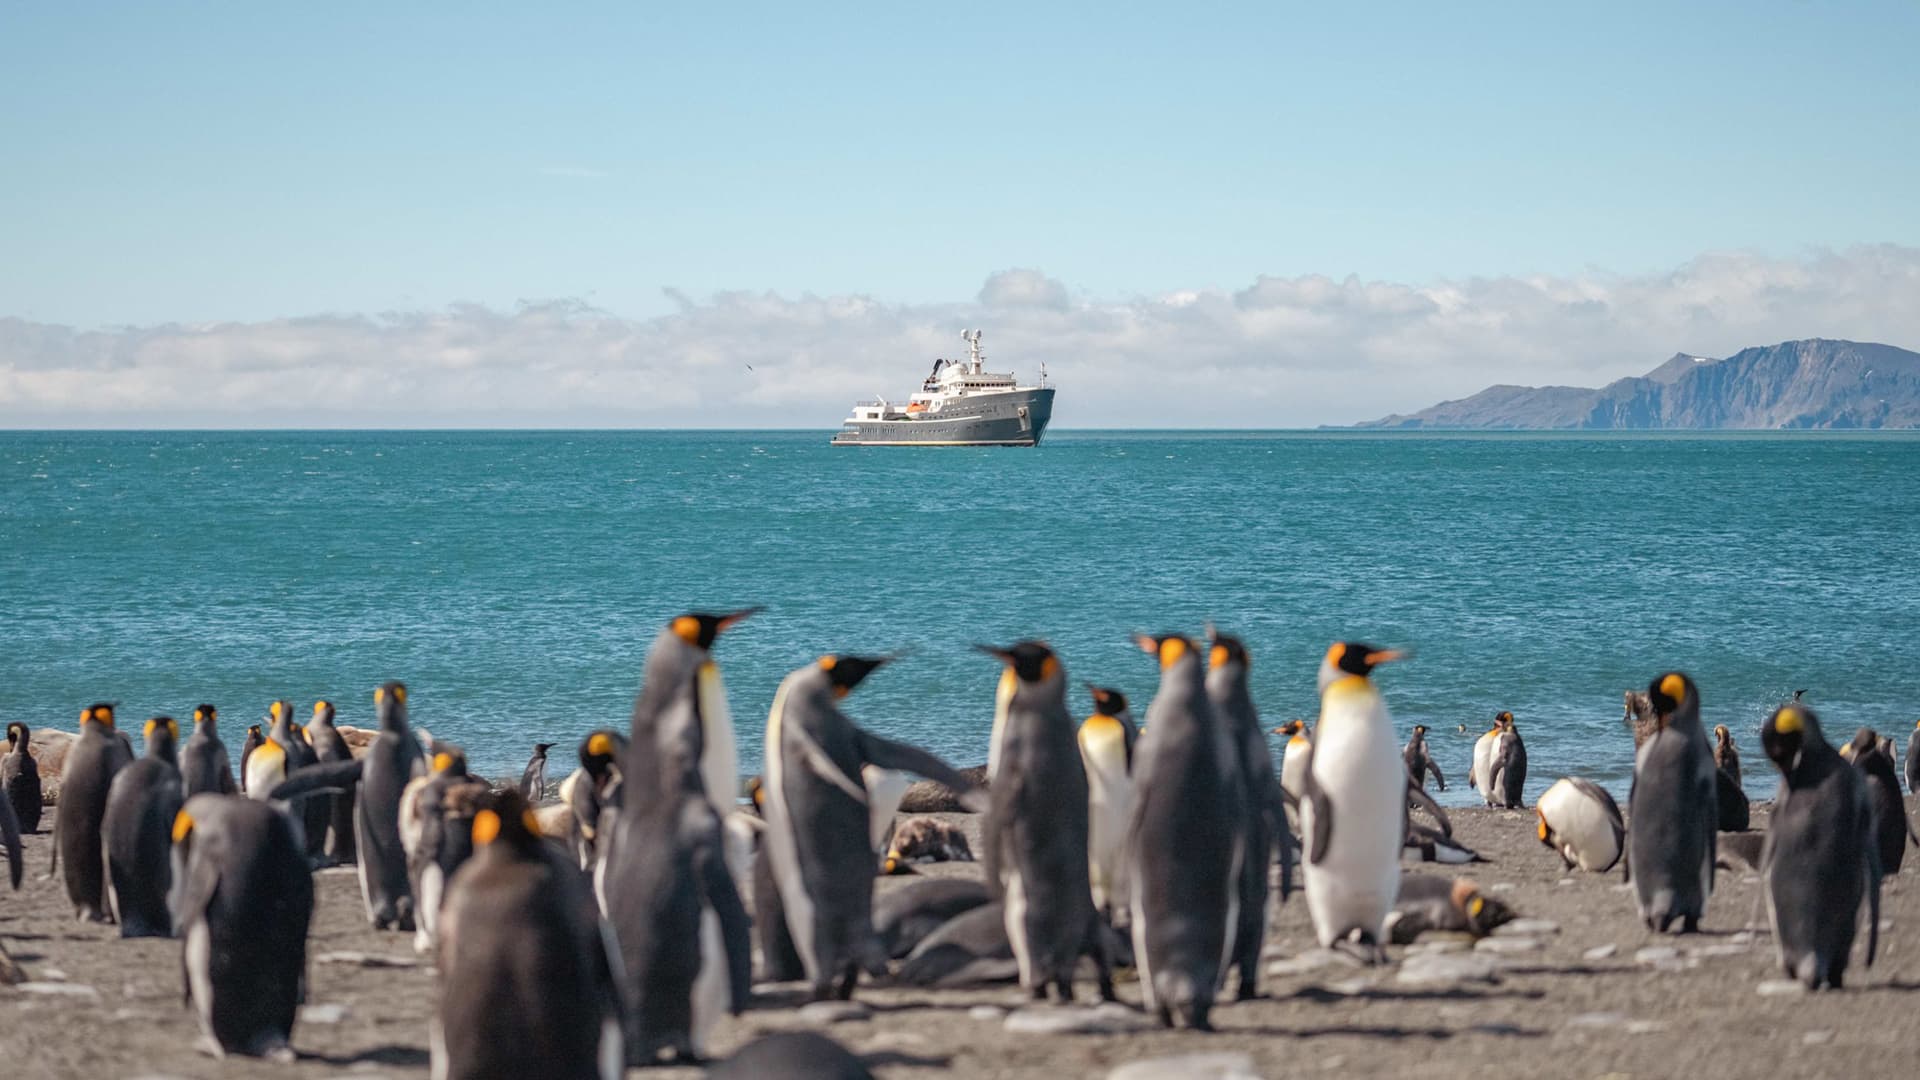 Photographing “The Serengeti of the Southern Ocean”